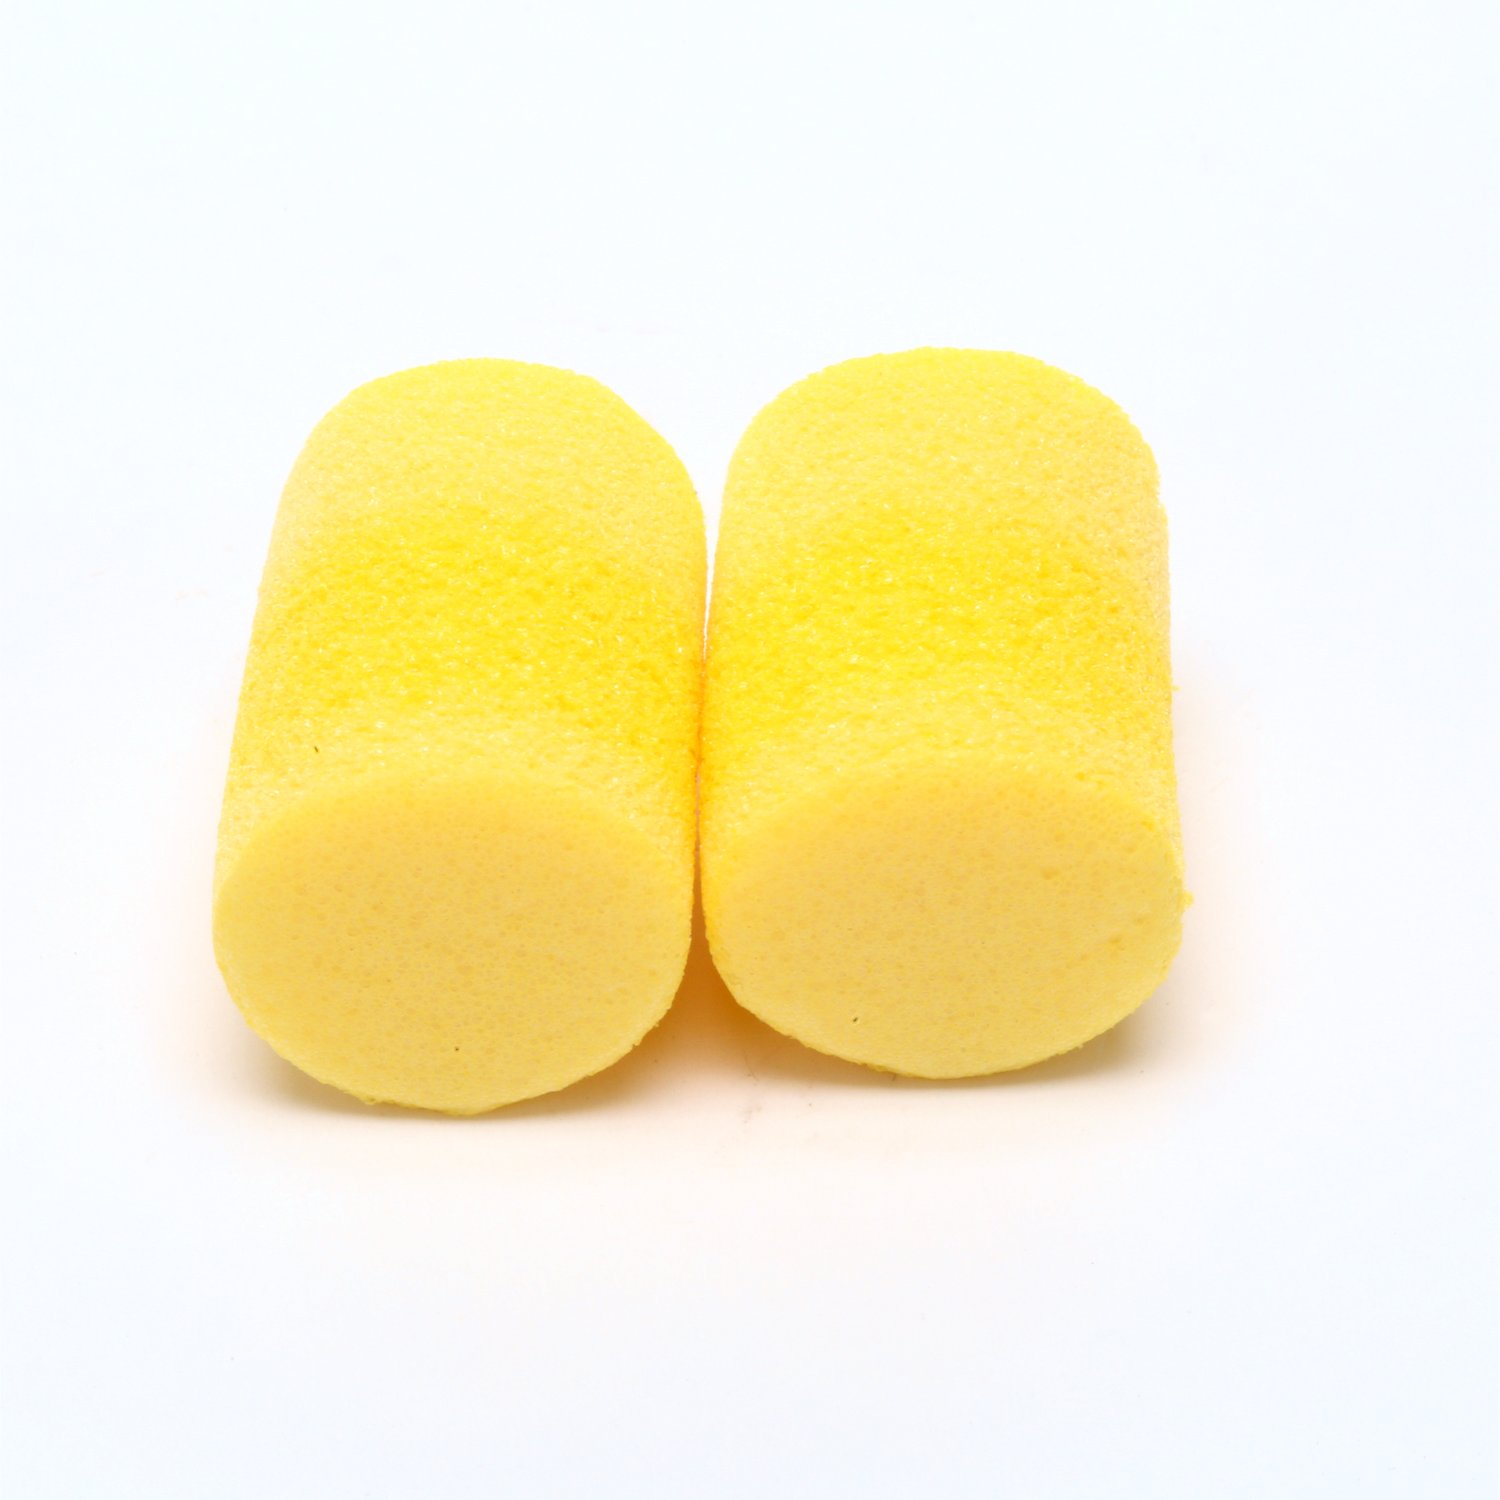 7000127206 - 3M E-A-R Classic Earplugs 310-1060, Uncorded, Pillow Pack, 360
Pair/Case